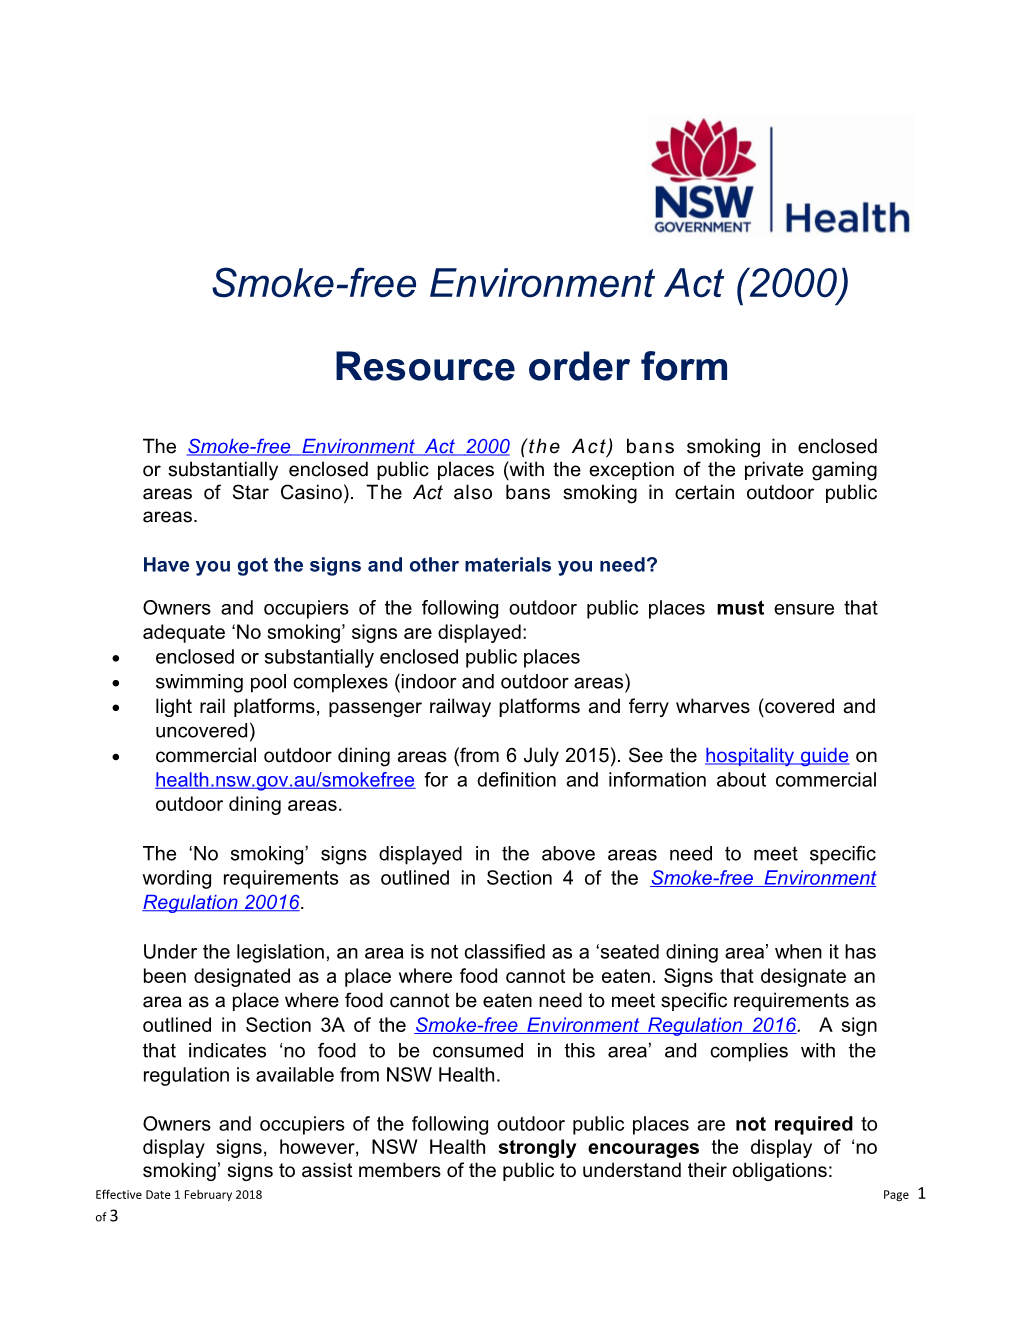 Smoke-Free Outdoor Resources Order Form